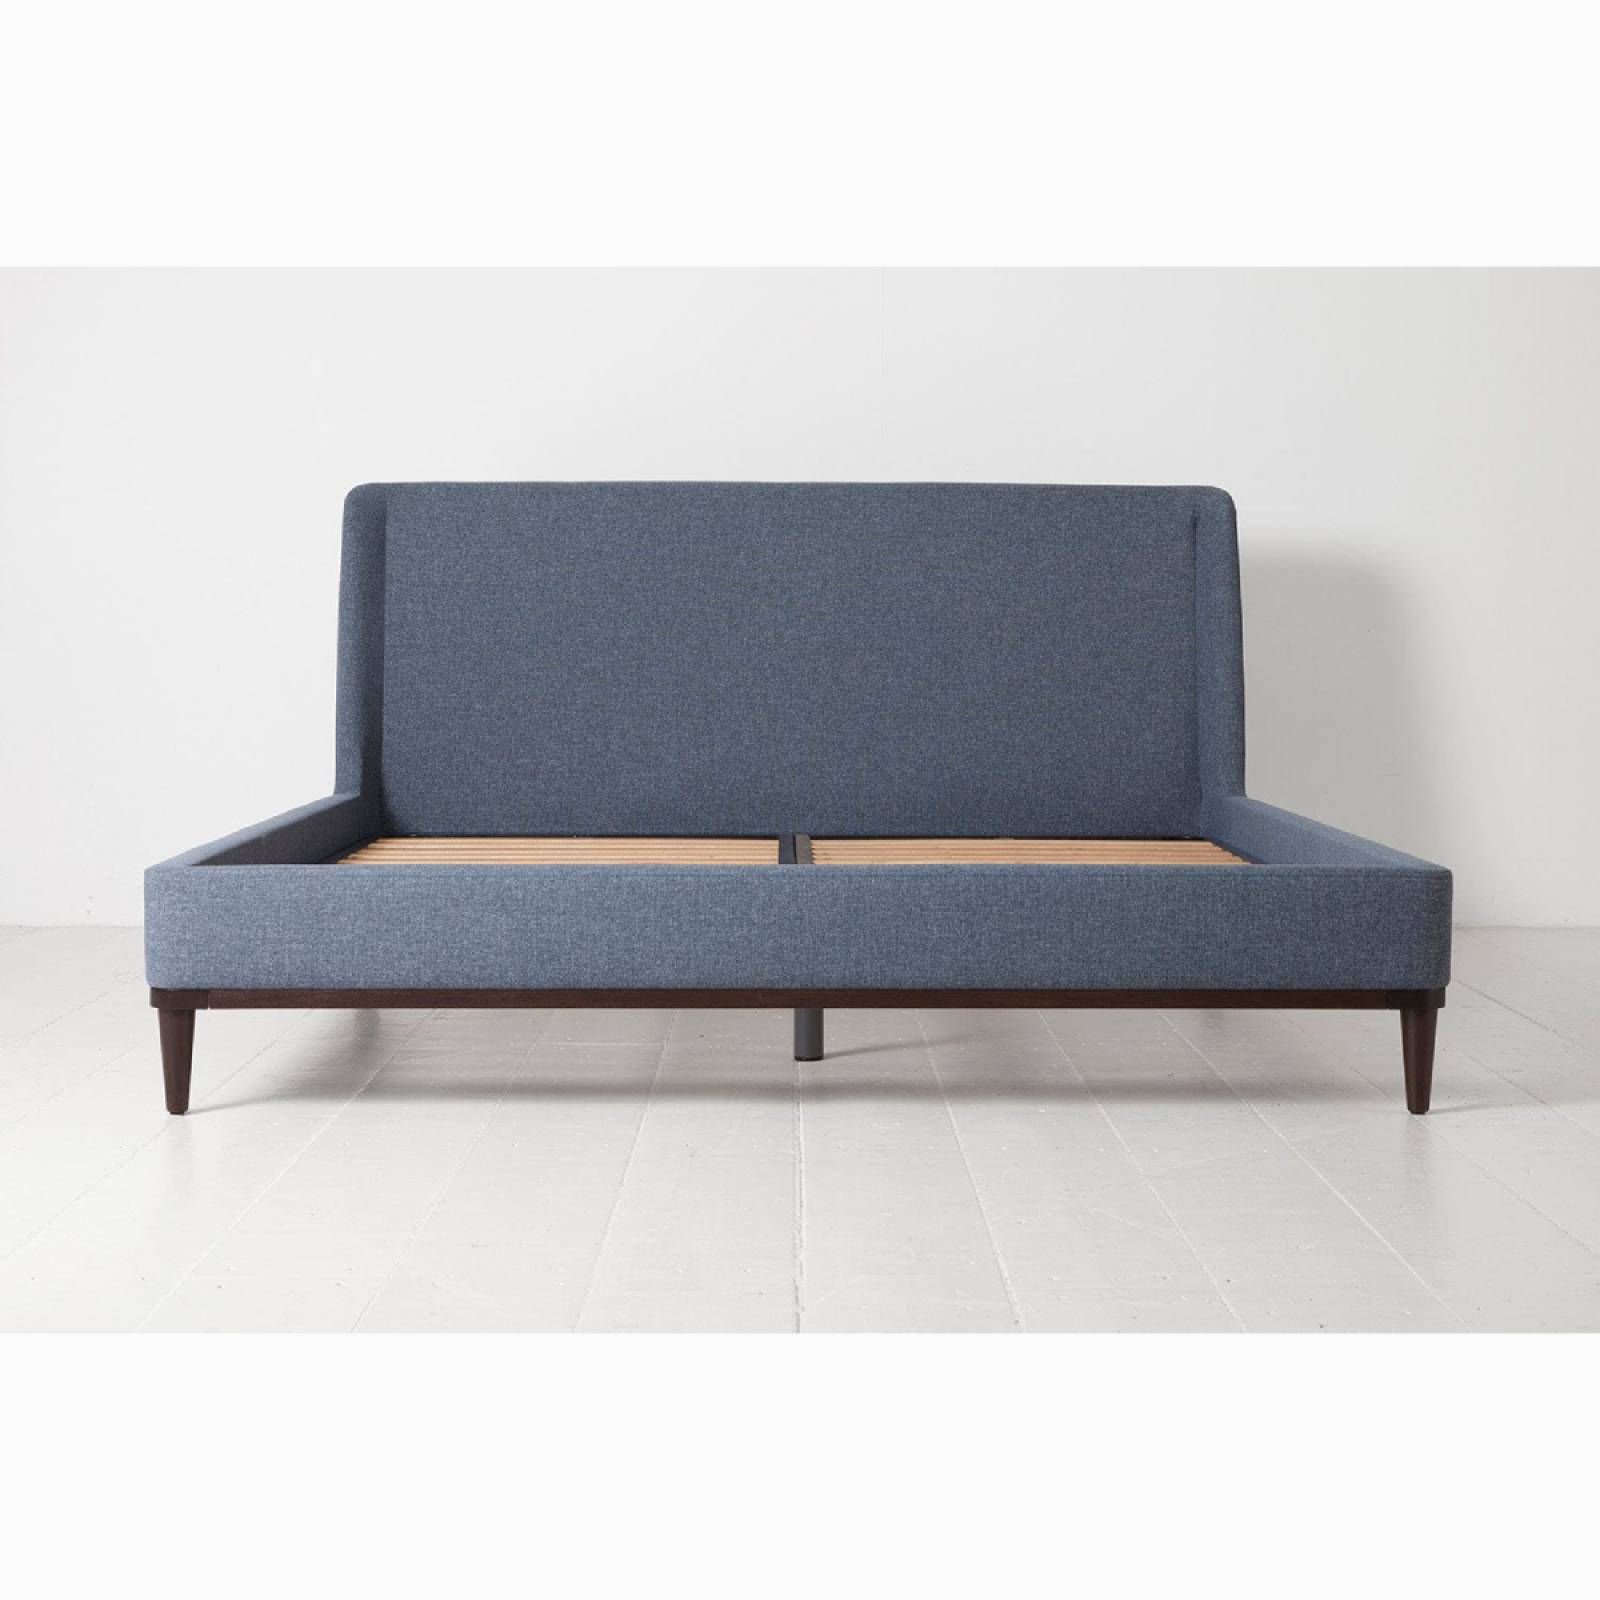 Swyft Bed 02 - Super King Size Bed Frame - Linen Midnight